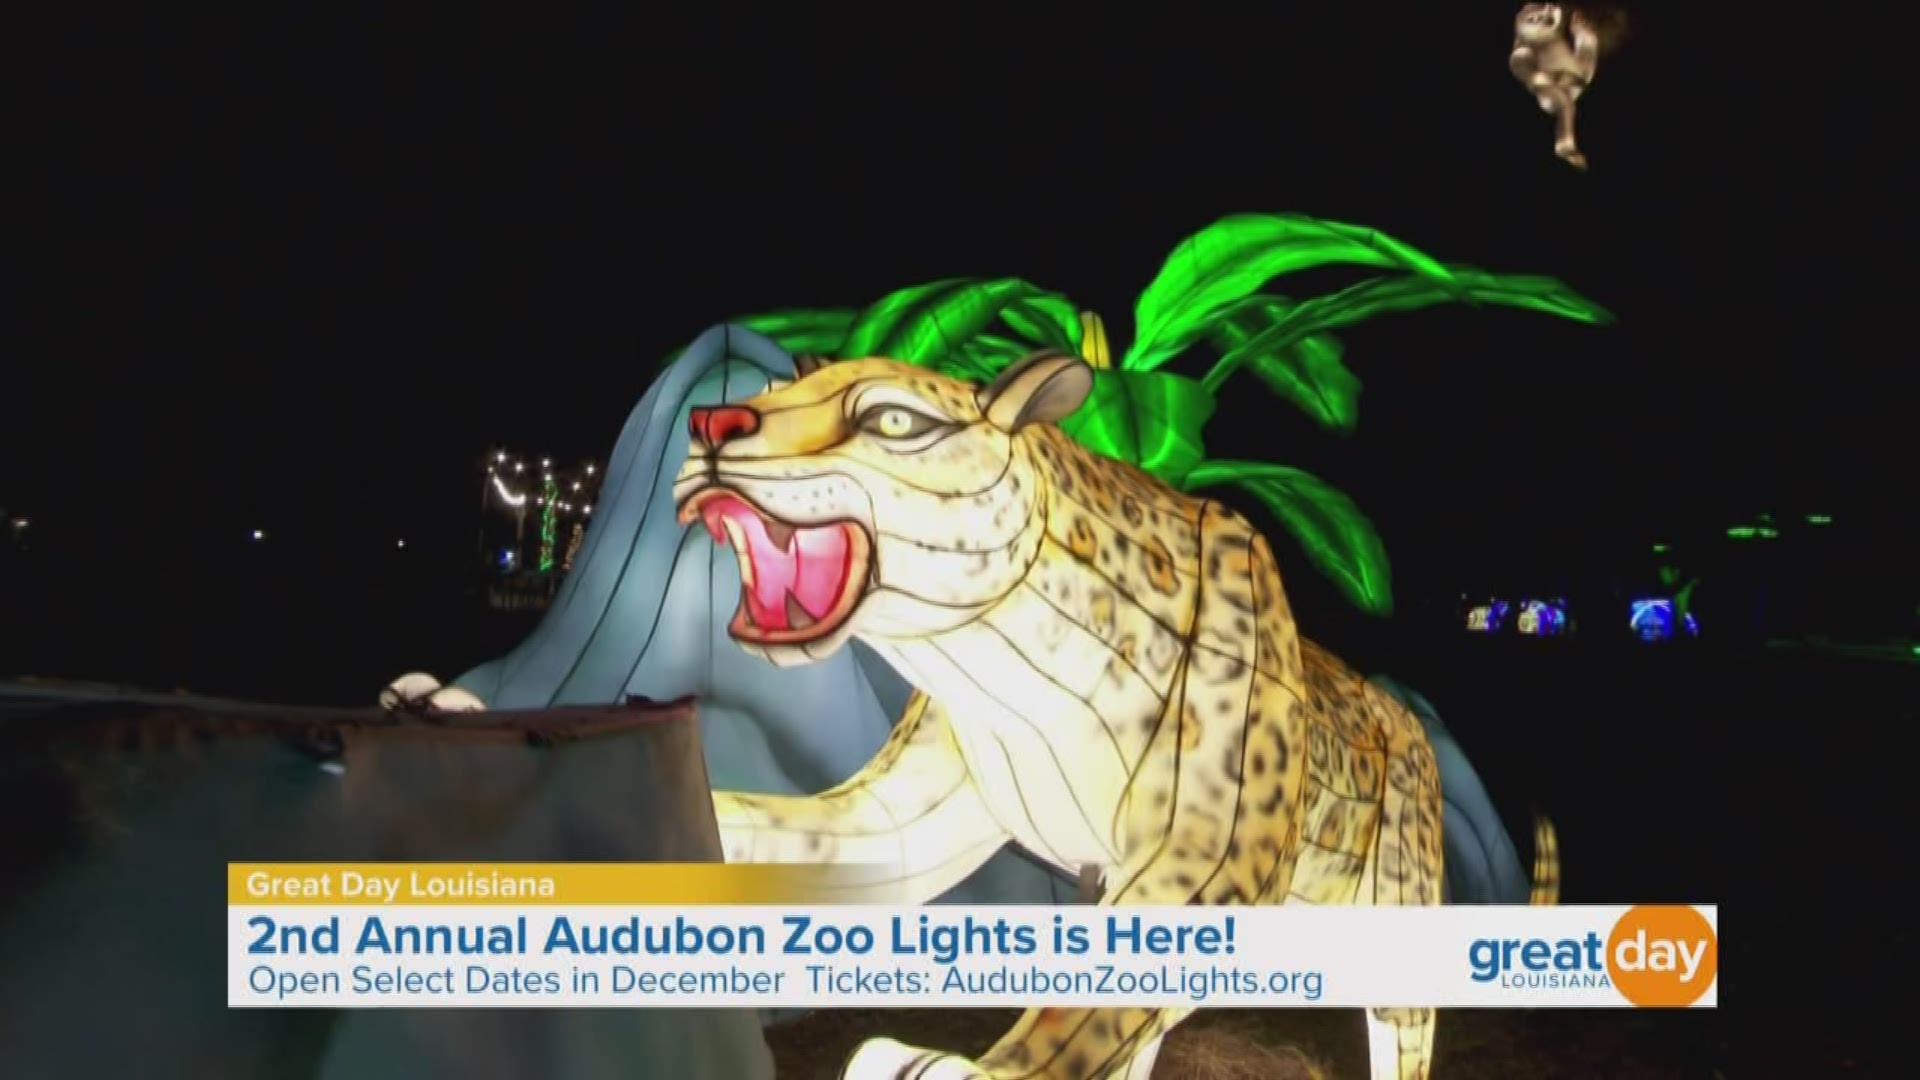 The Audubon Zoo Lights is open select days in December. For tickets, visit https://www.audubonzoolights.org.